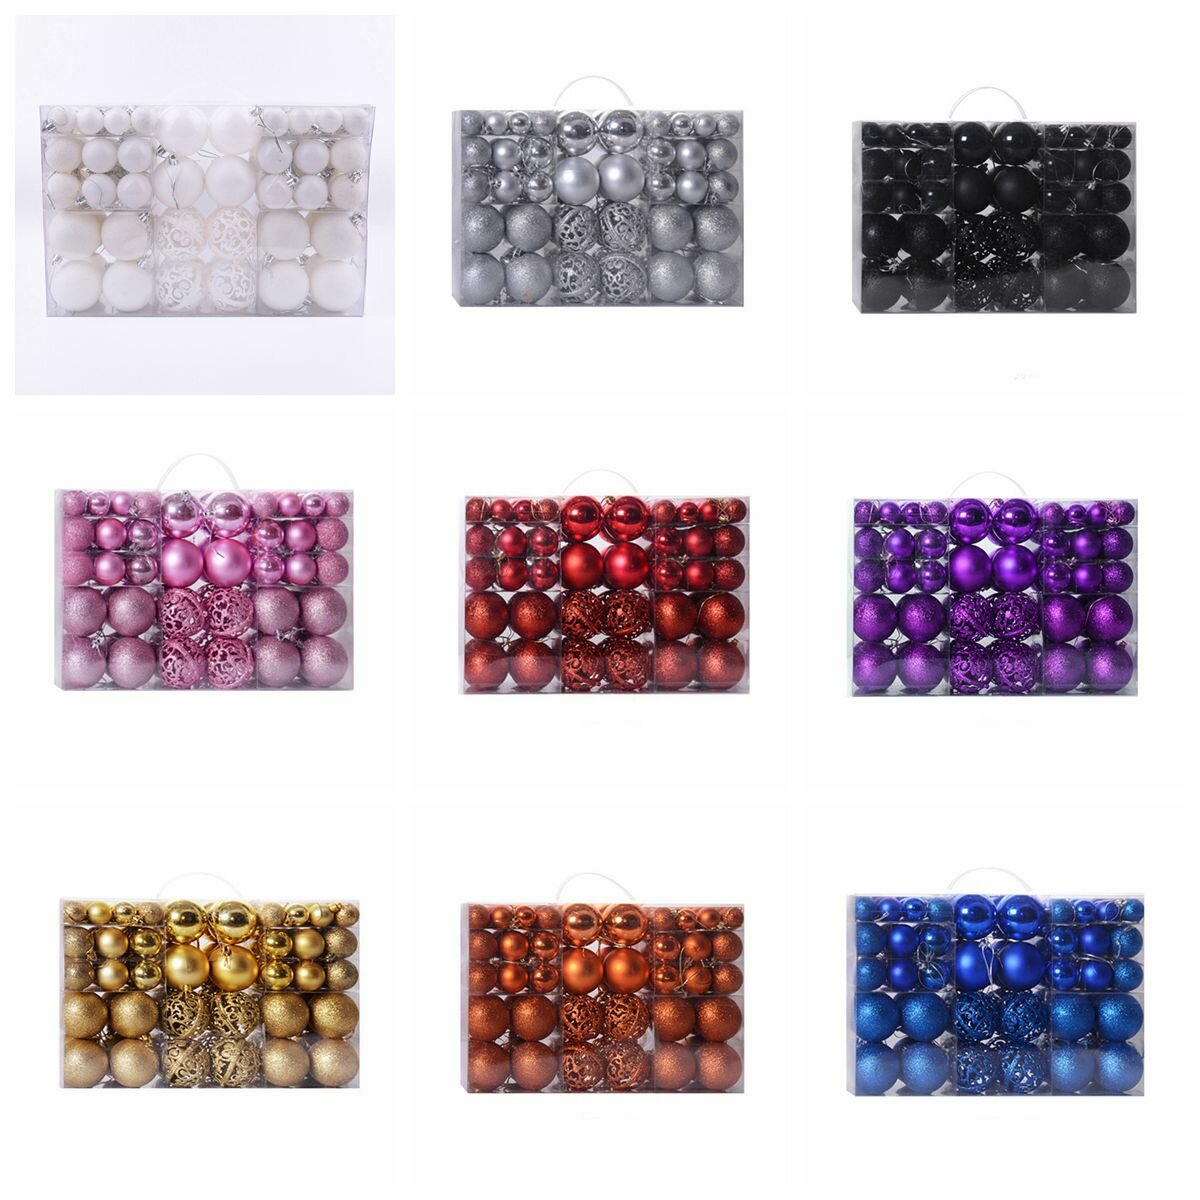 100pcs Decration Ball Set Christmas Tree Decorations Balls Bauble Pack Hanging Ball For Home Office 